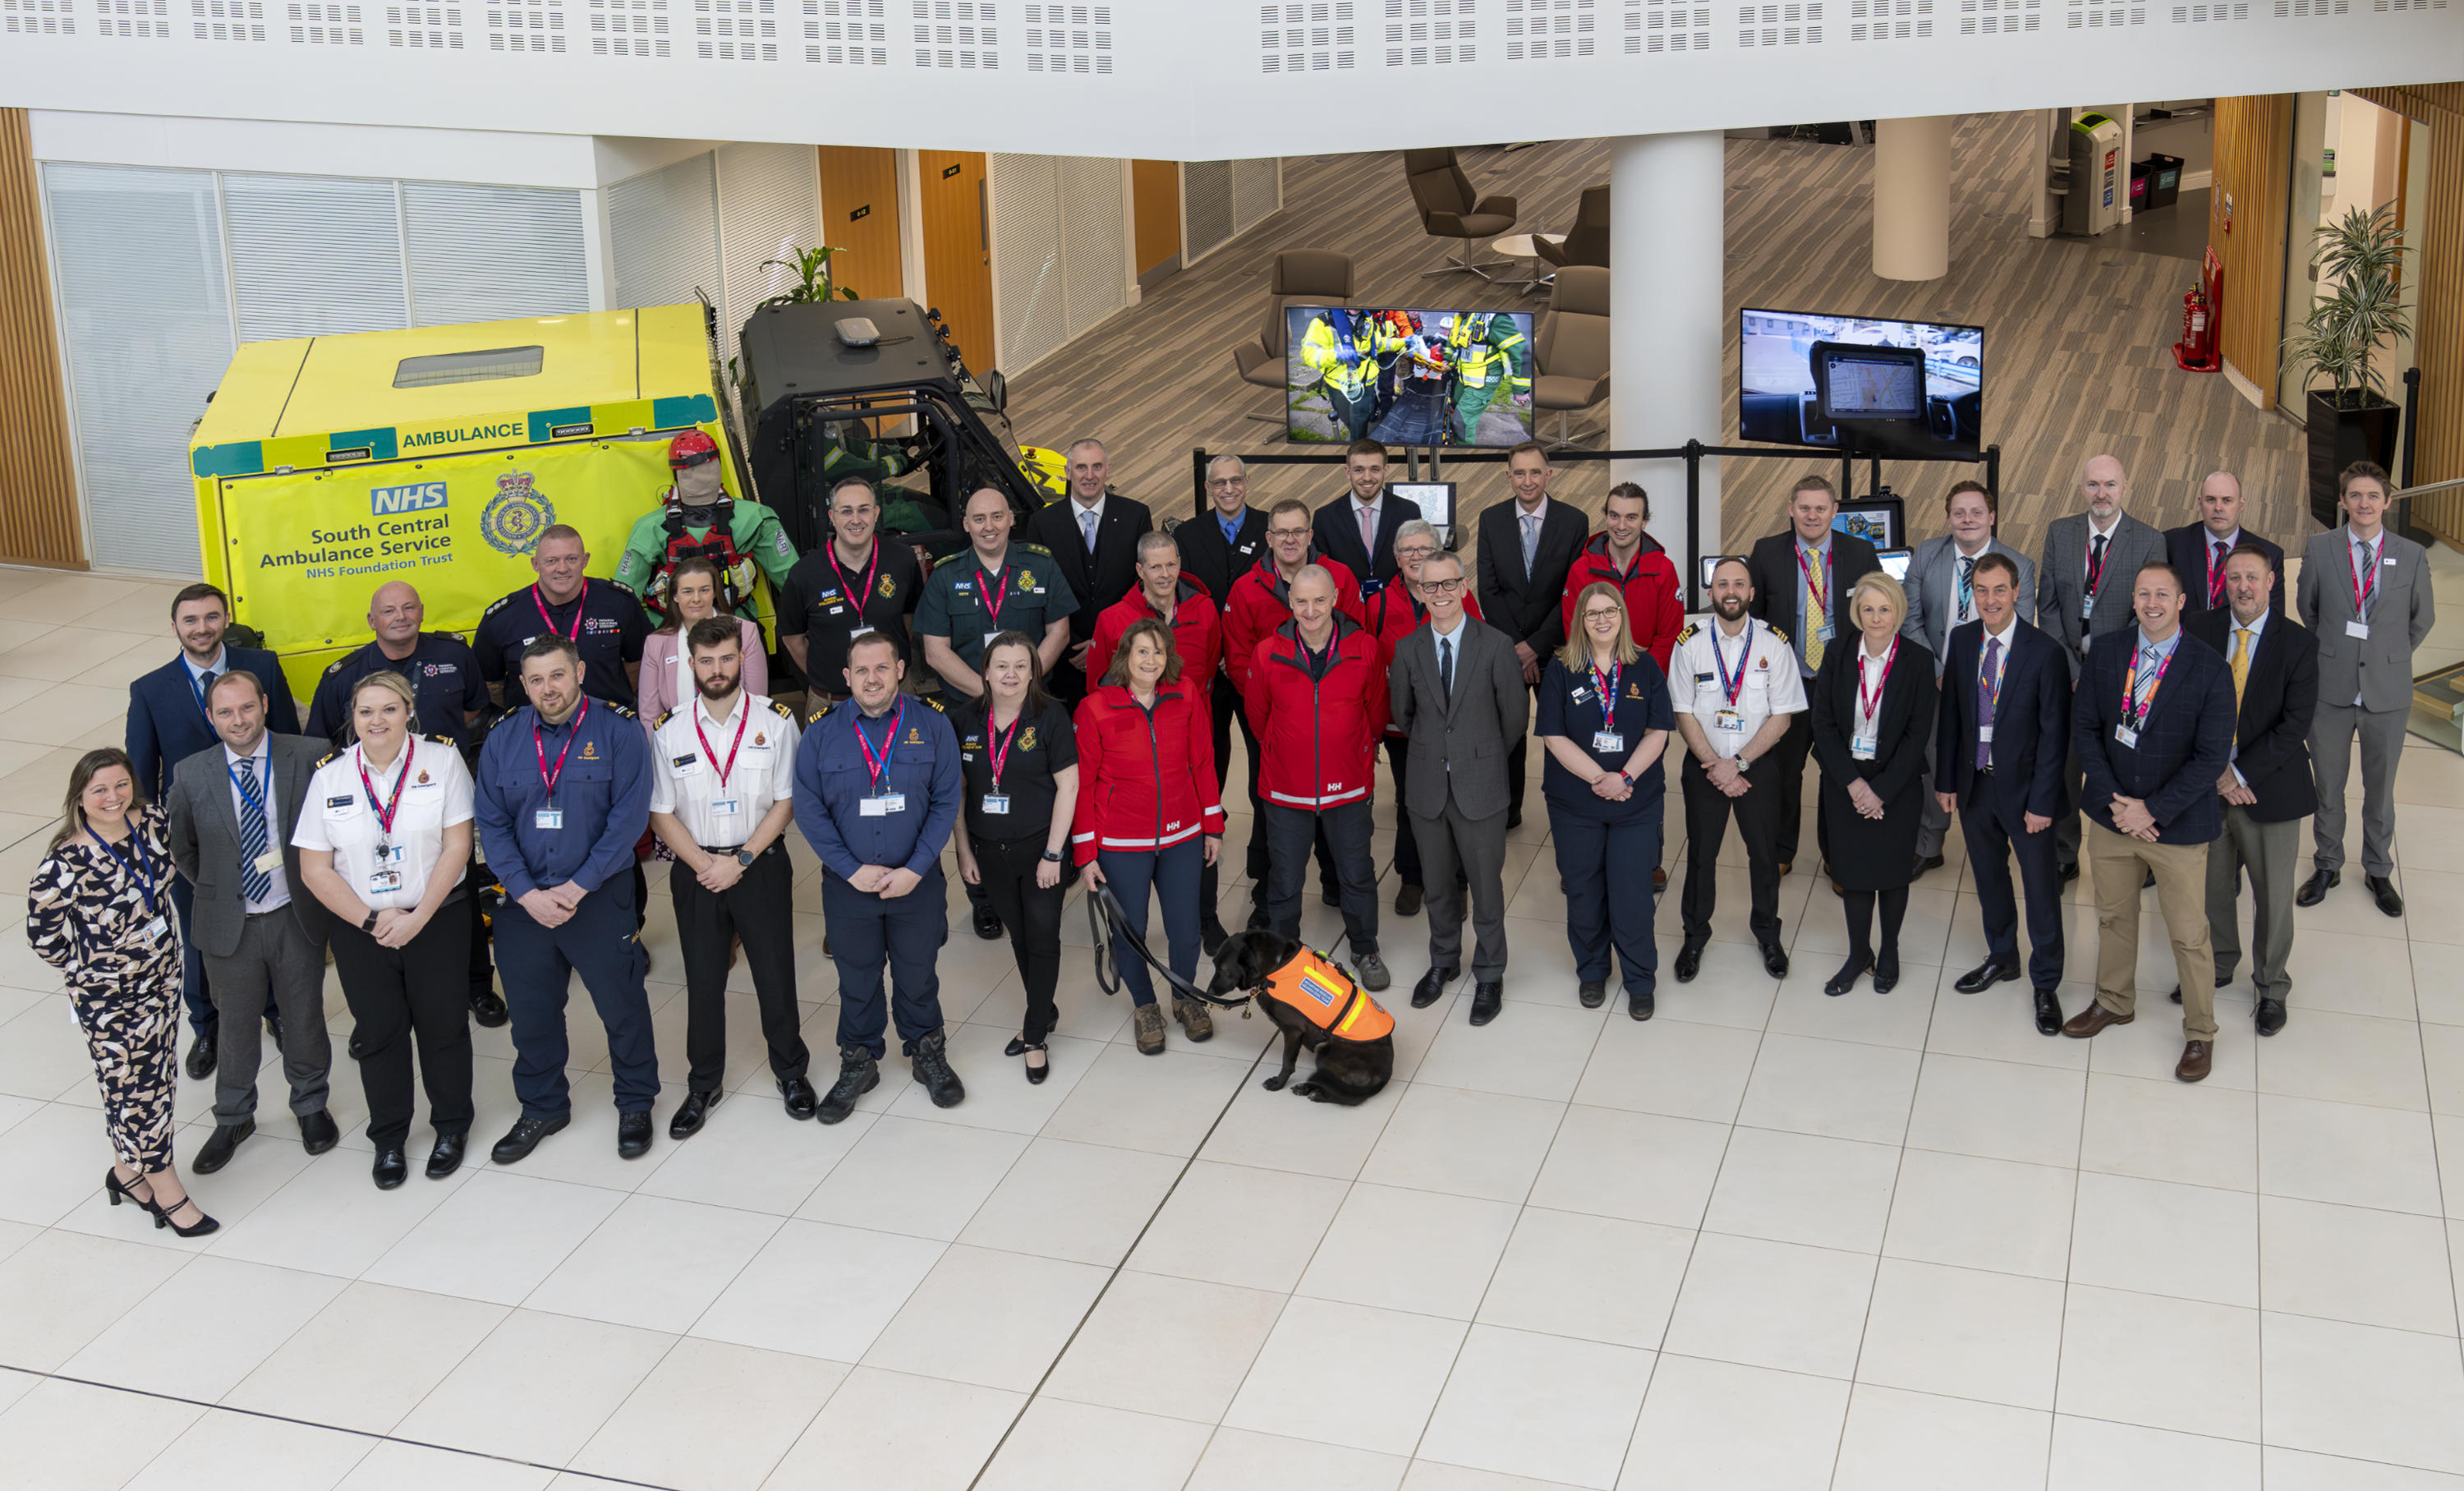 Emergency services and OS staff who attended the showcase event